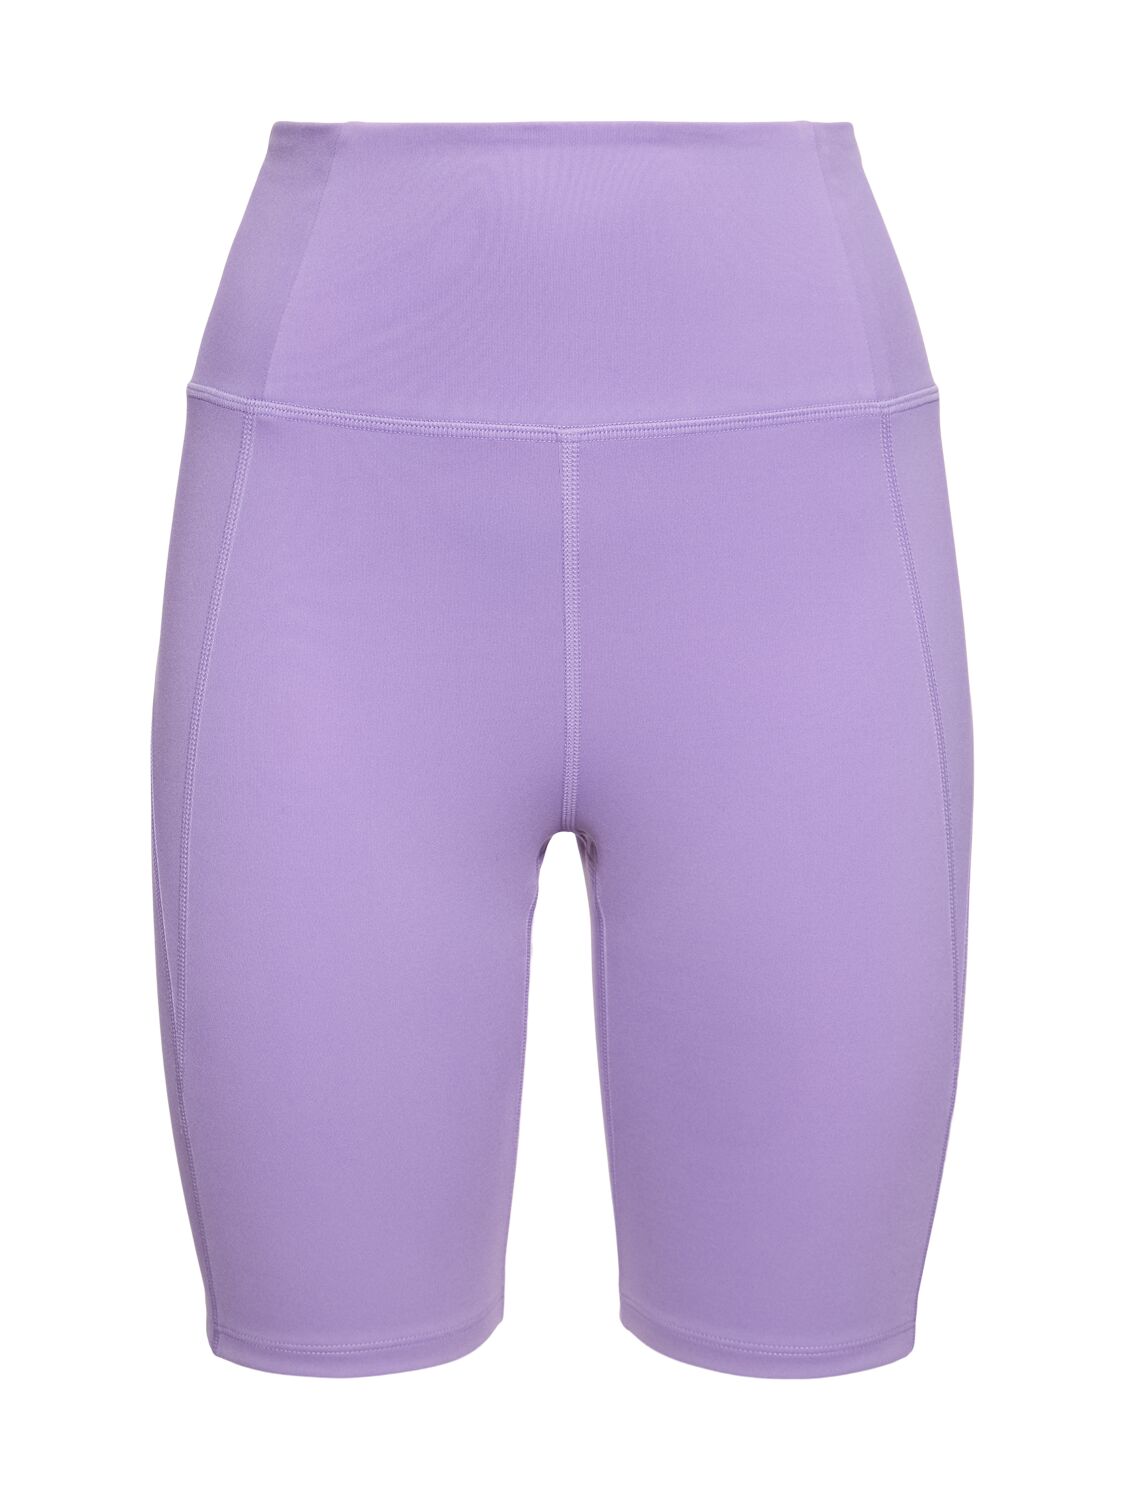 Girlfriend Collective High Rise Stretch Tech Running Shorts In Purple